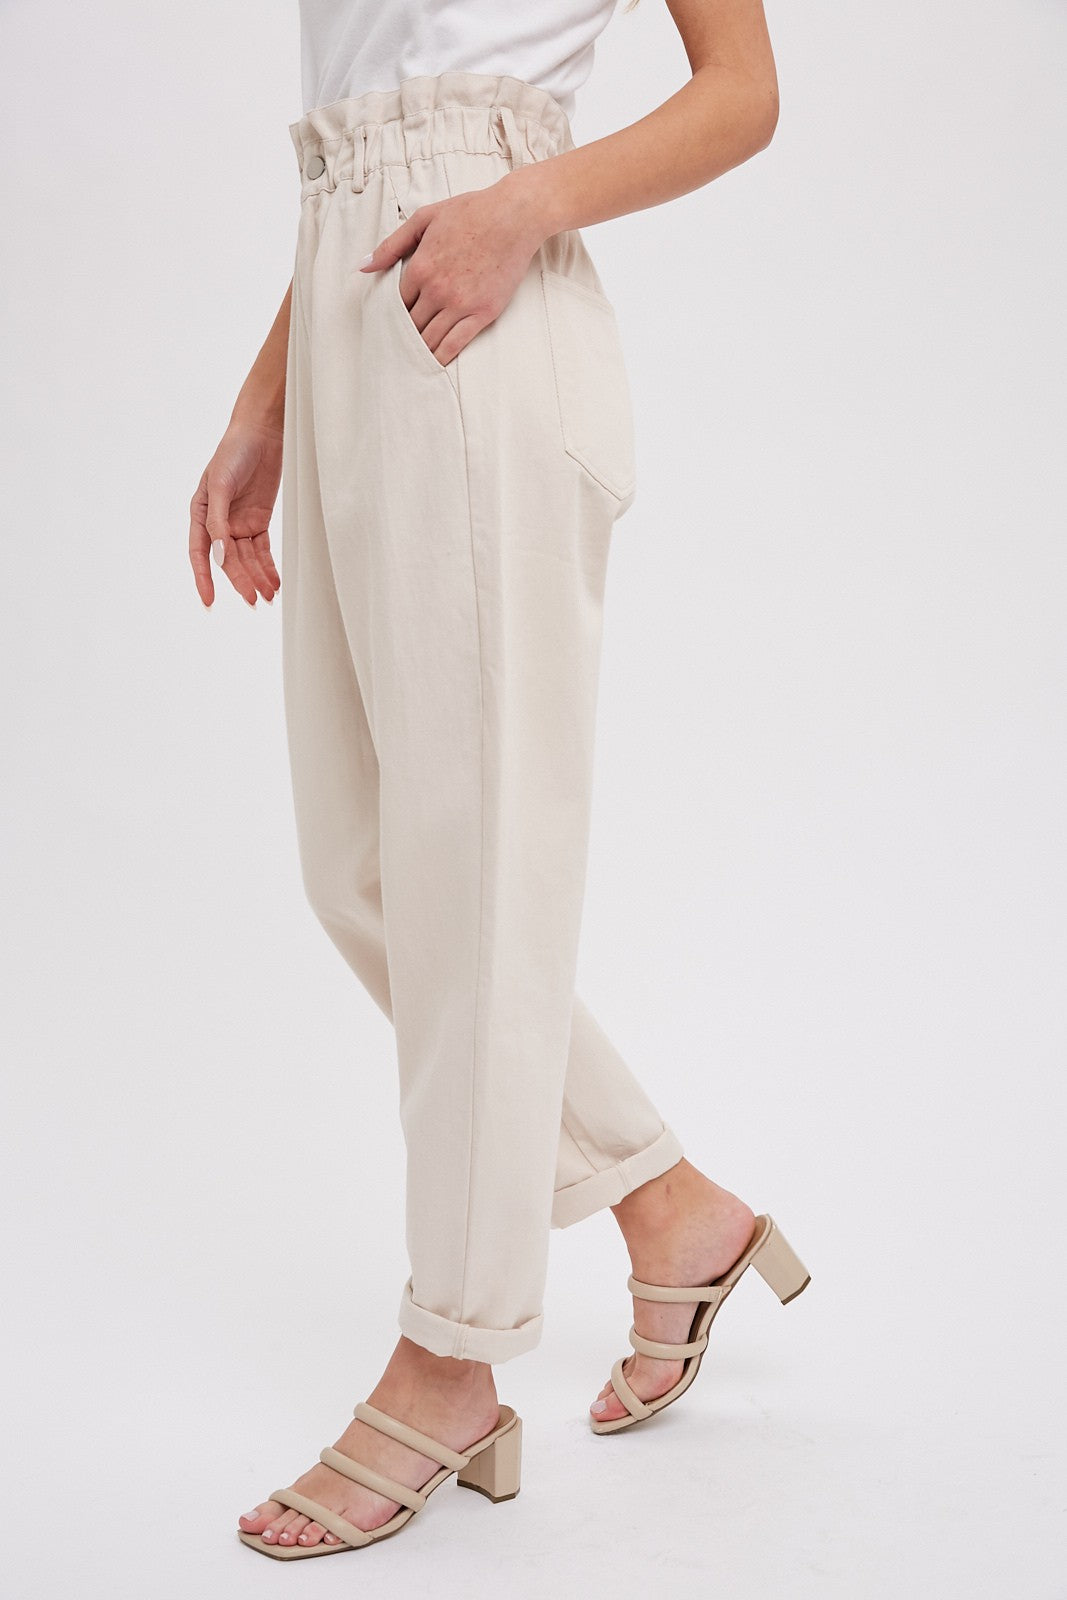 Free People Paper Bag Pant in Neutral | REVOLVE